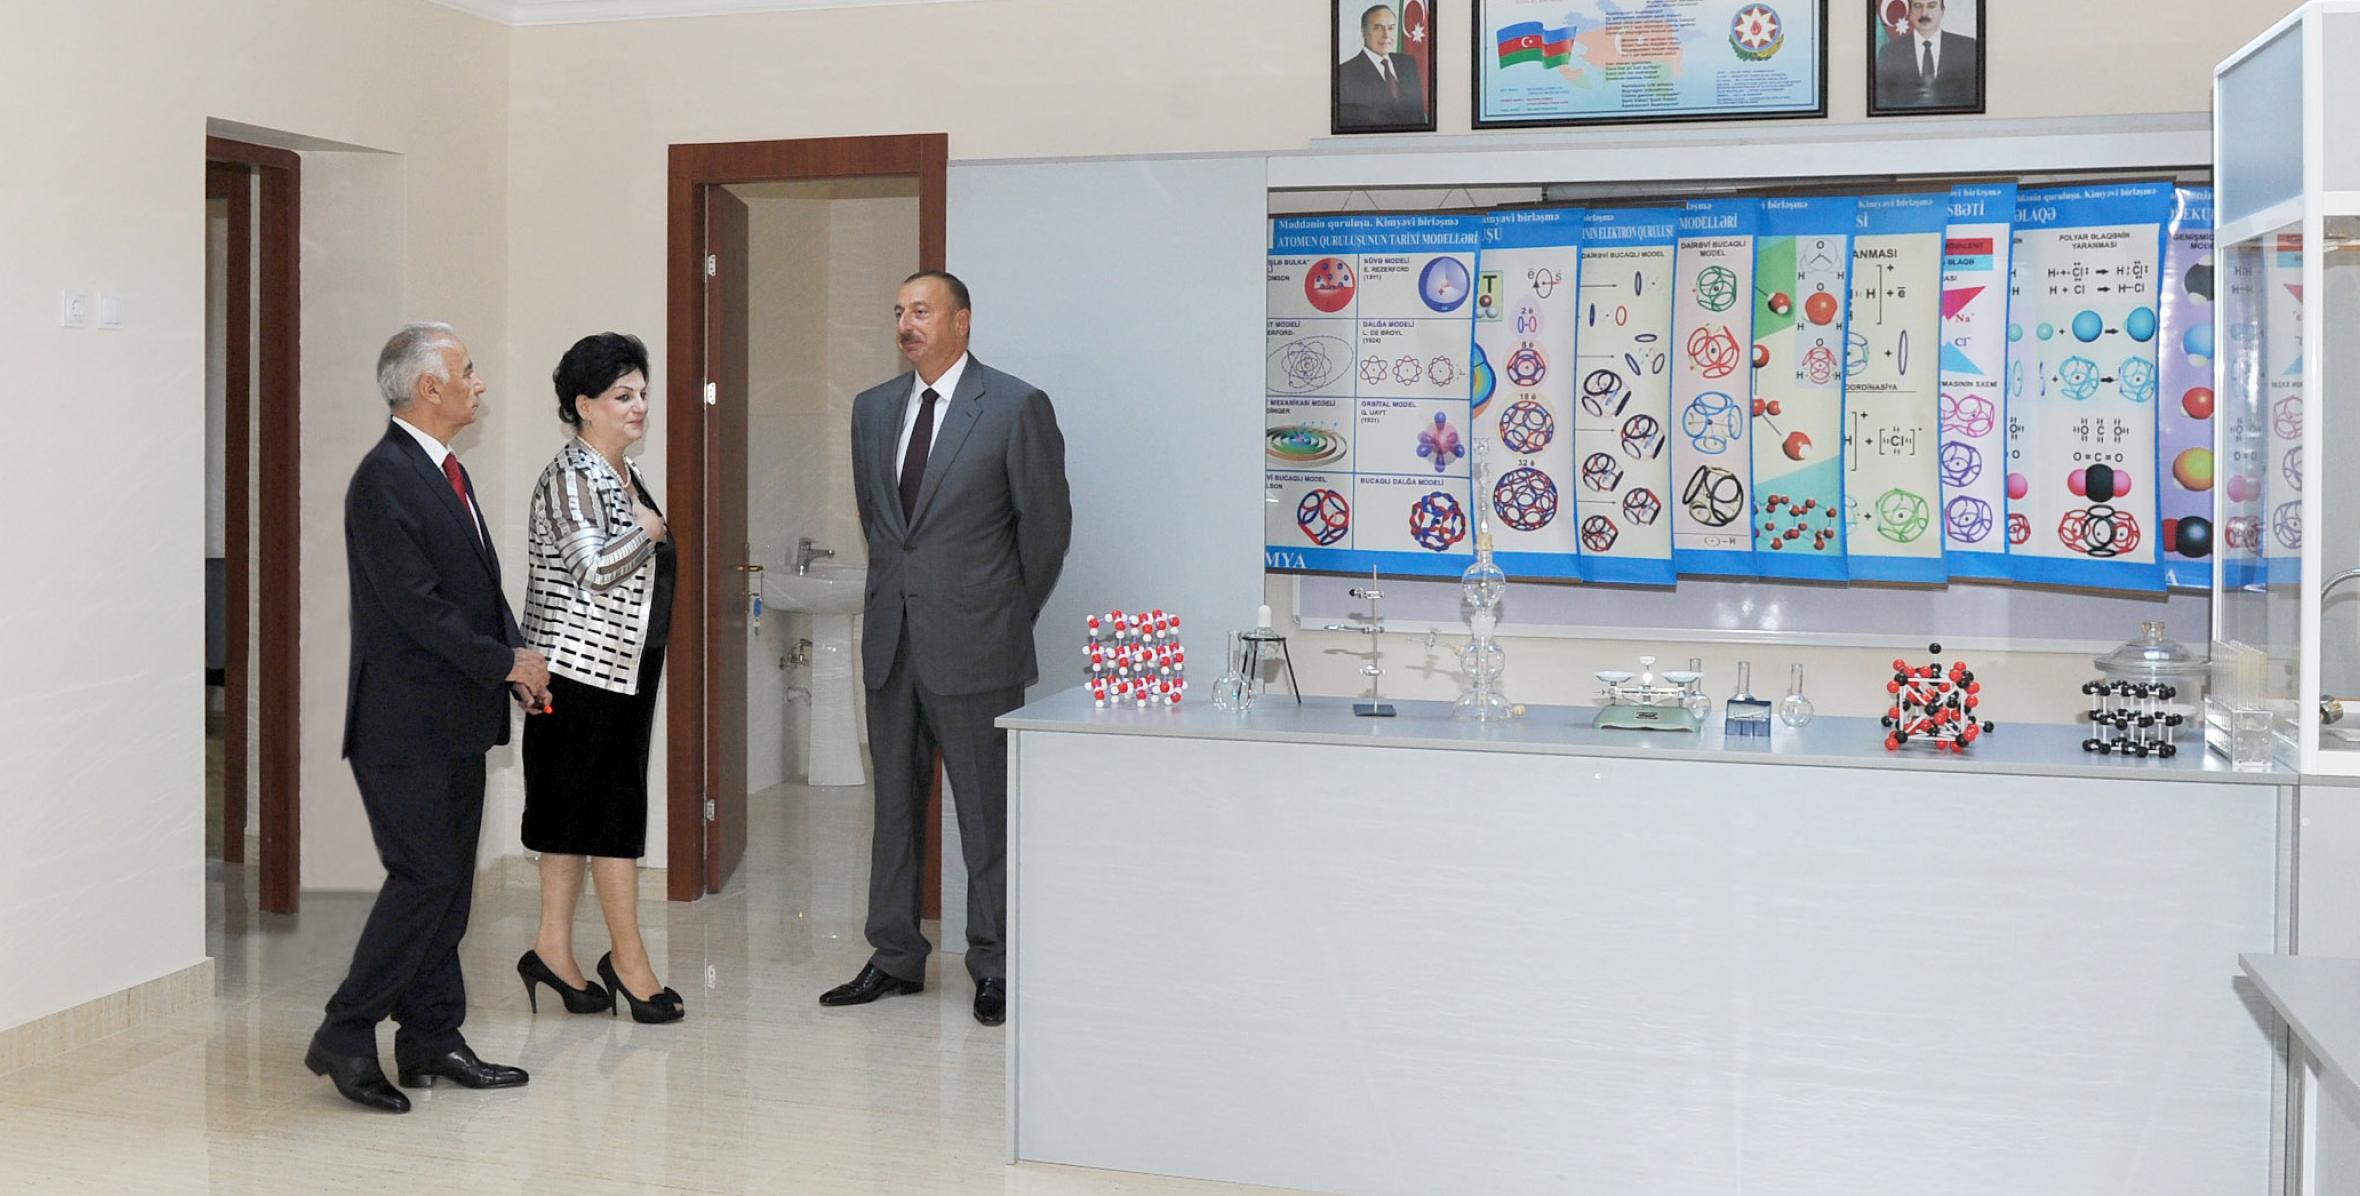 Ilham Aliyev reviewed secondary school No. 56 in Khatai District after major overhaul and reconstruction